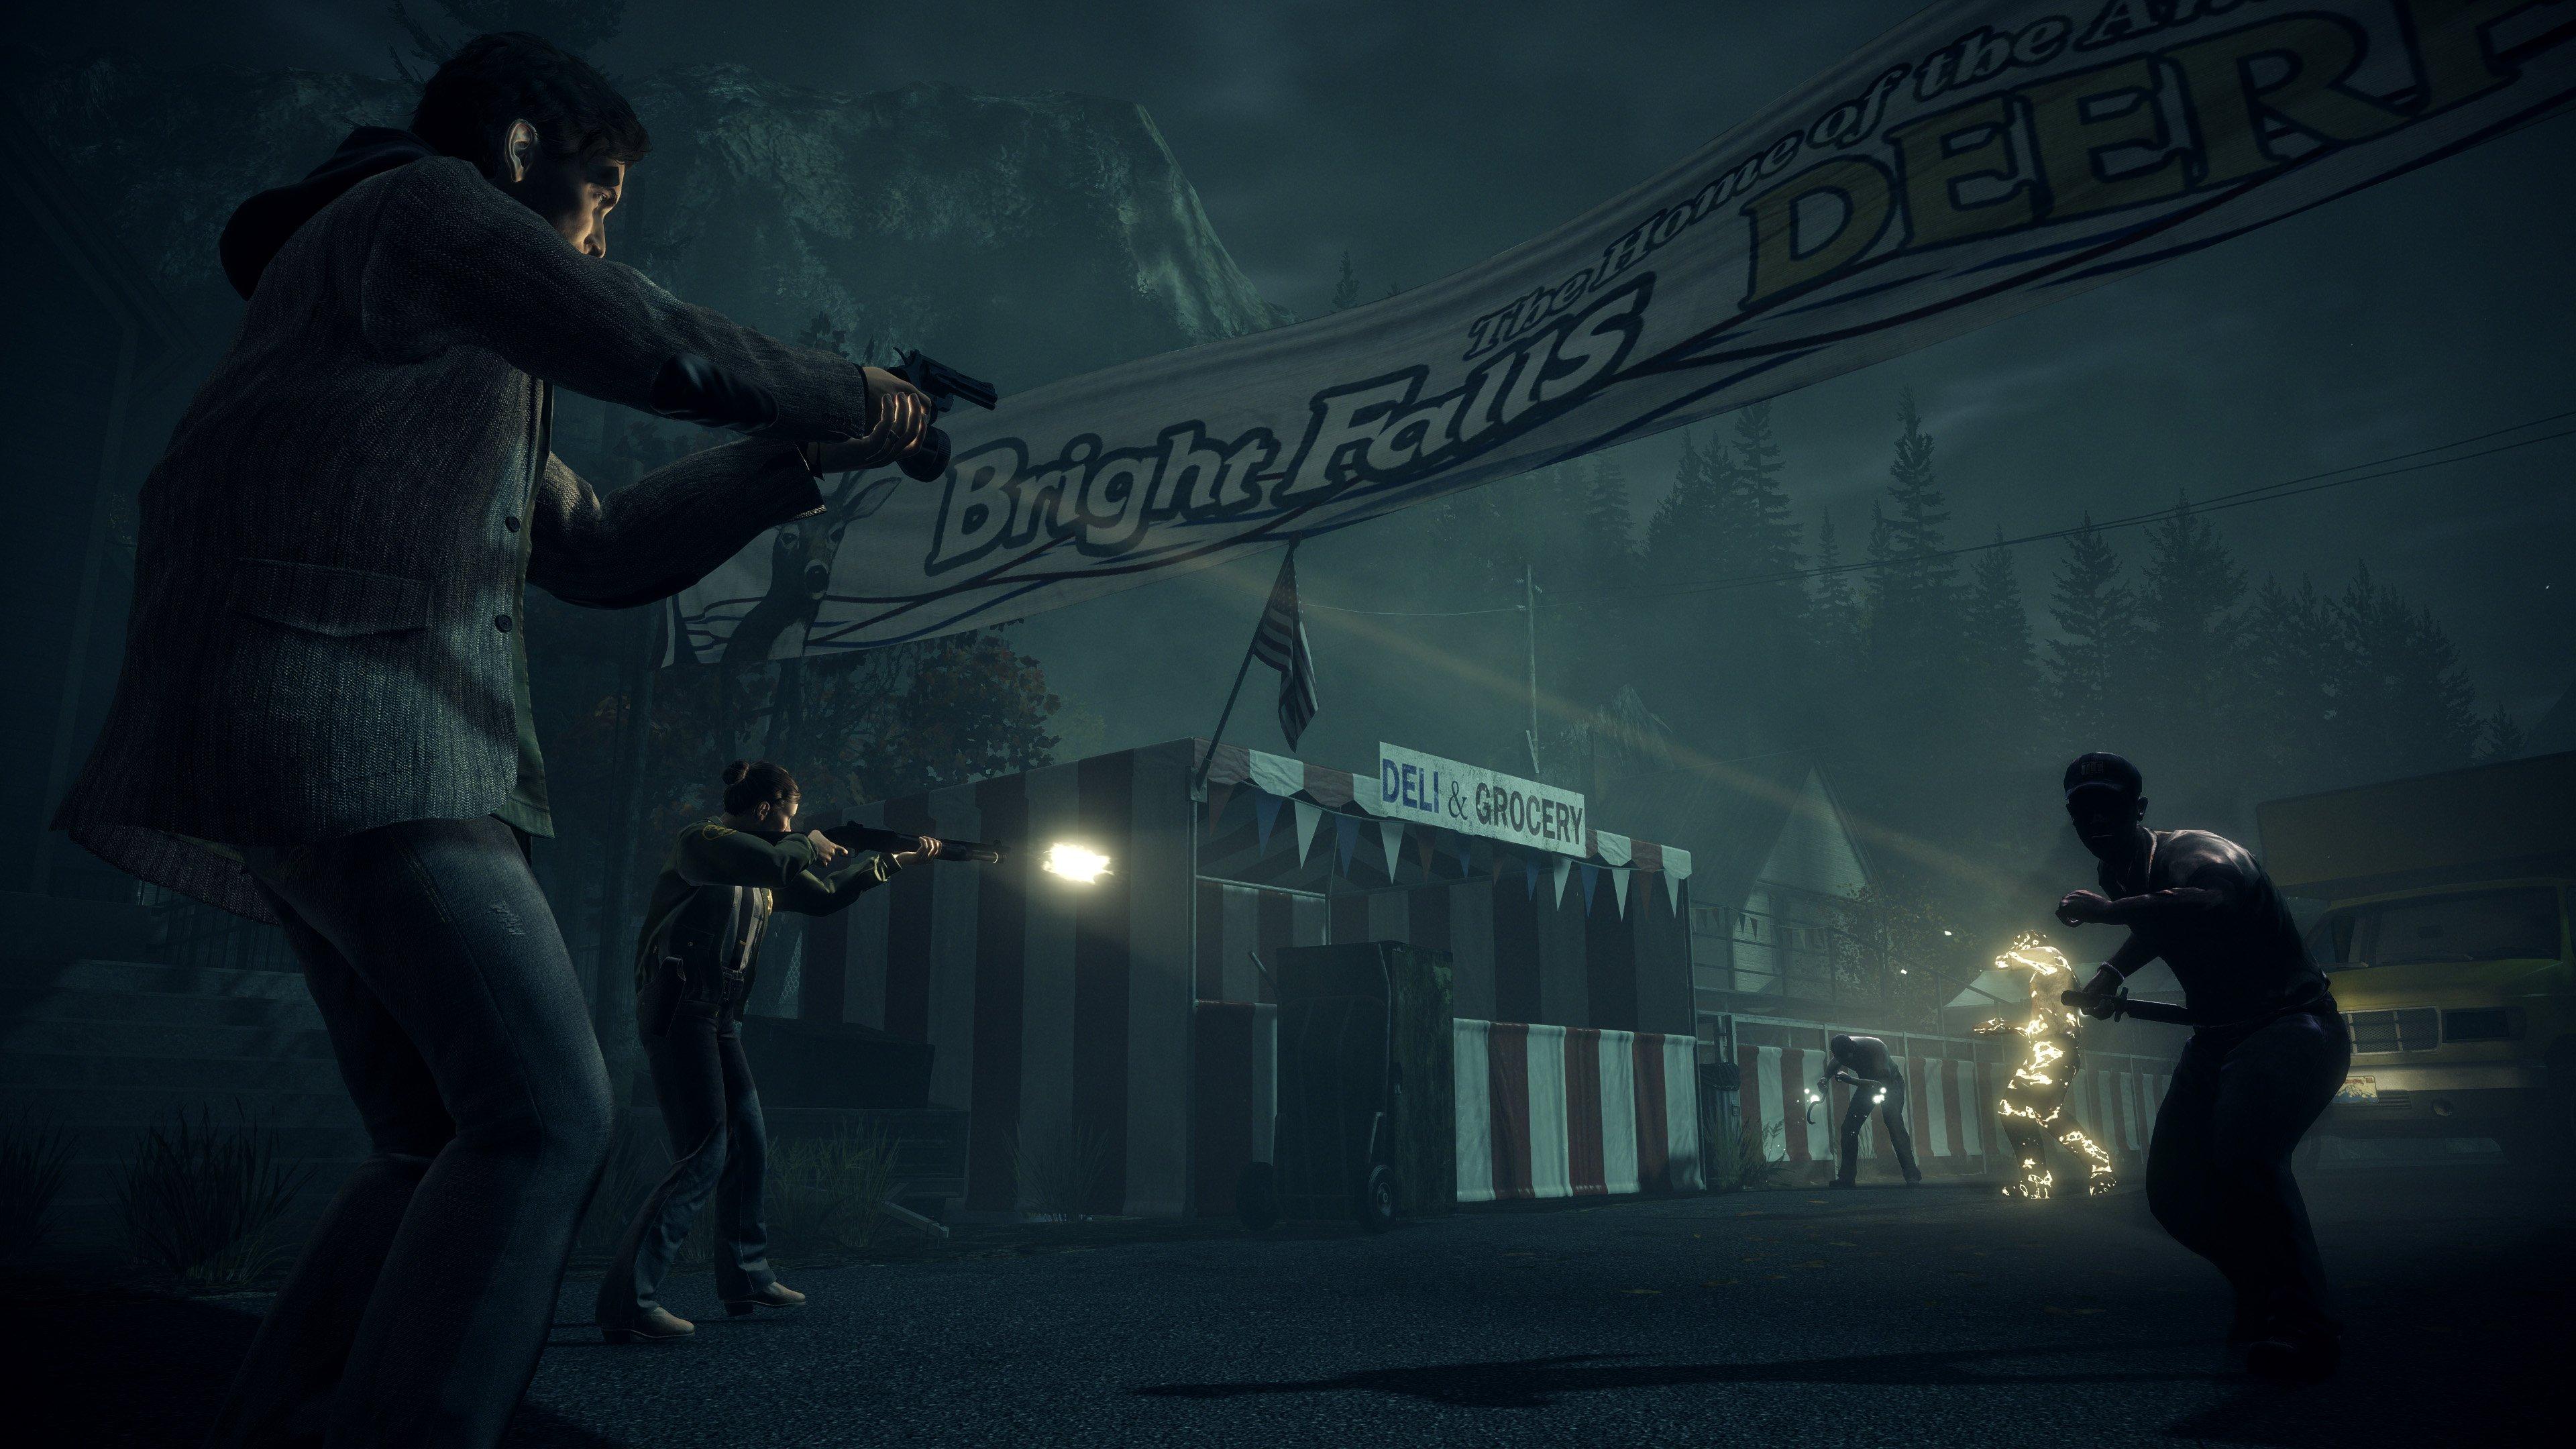 Alan Wake Remastered for Nintendo Switch - Nintendo Official Site for Canada